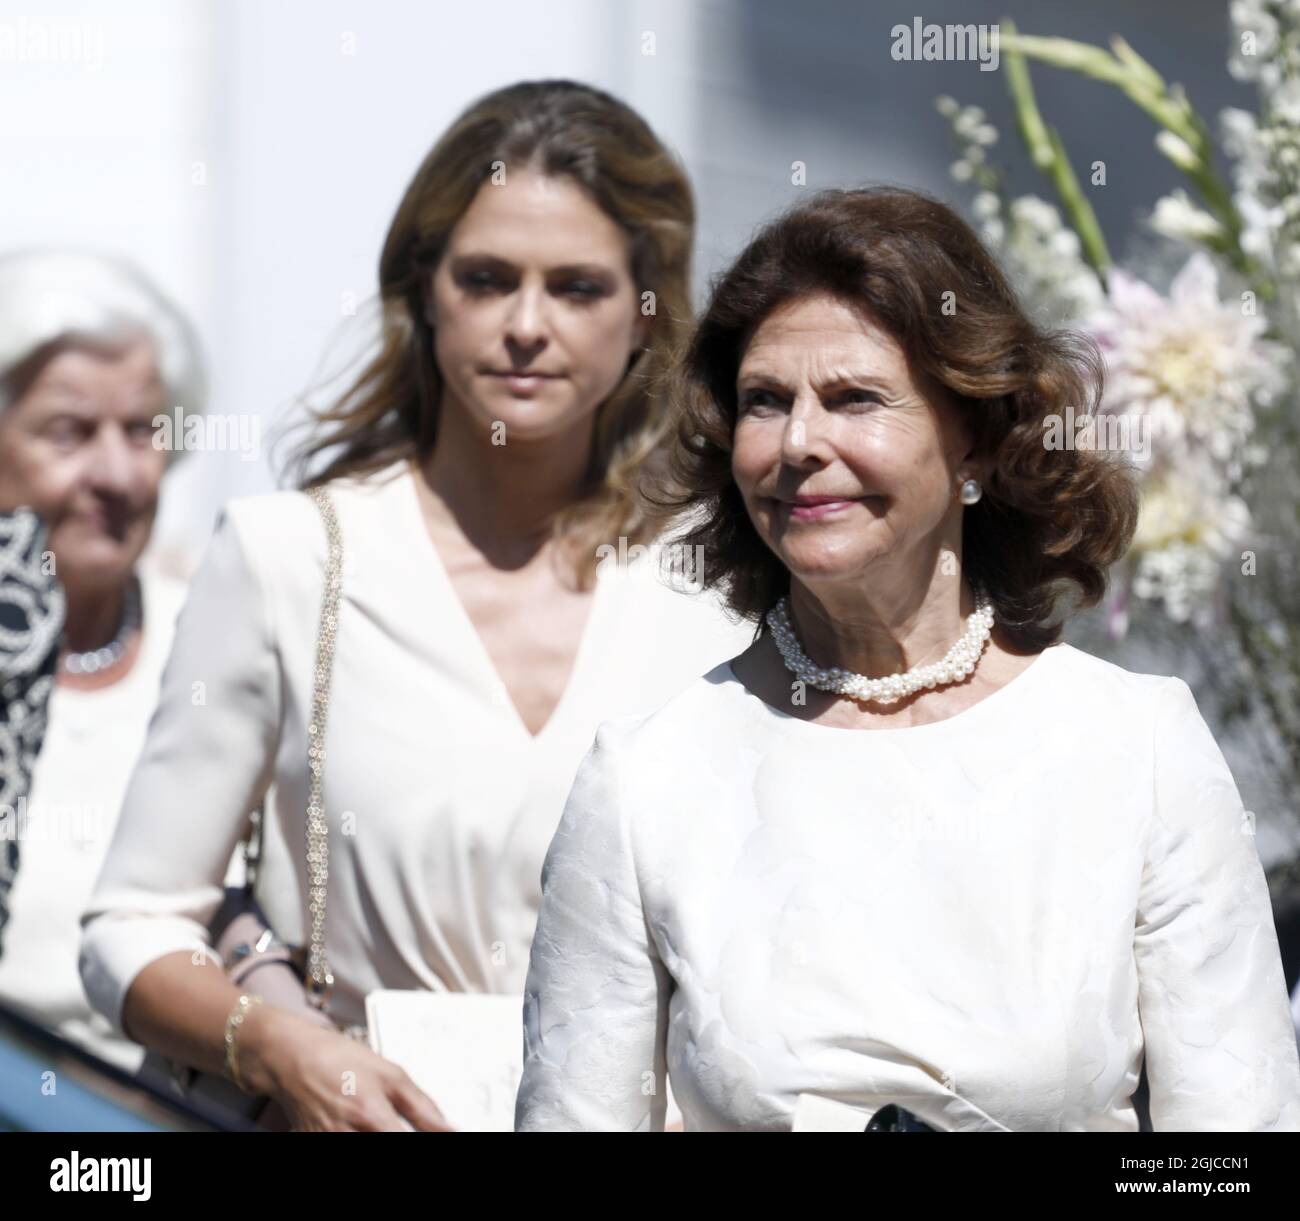 Queen Silvia, Princesss Madeleine Funeral of Anki Wallenberg in Dalaro church, Stockholm, Sweden 19 July 2019 Anki Wallenberg died in a sailing accident on the lake Geneva. She resided in London and was a close friend to the Swedish Royal Family. (c) Patrik Osterberg / TT / kod 2857  Stock Photo